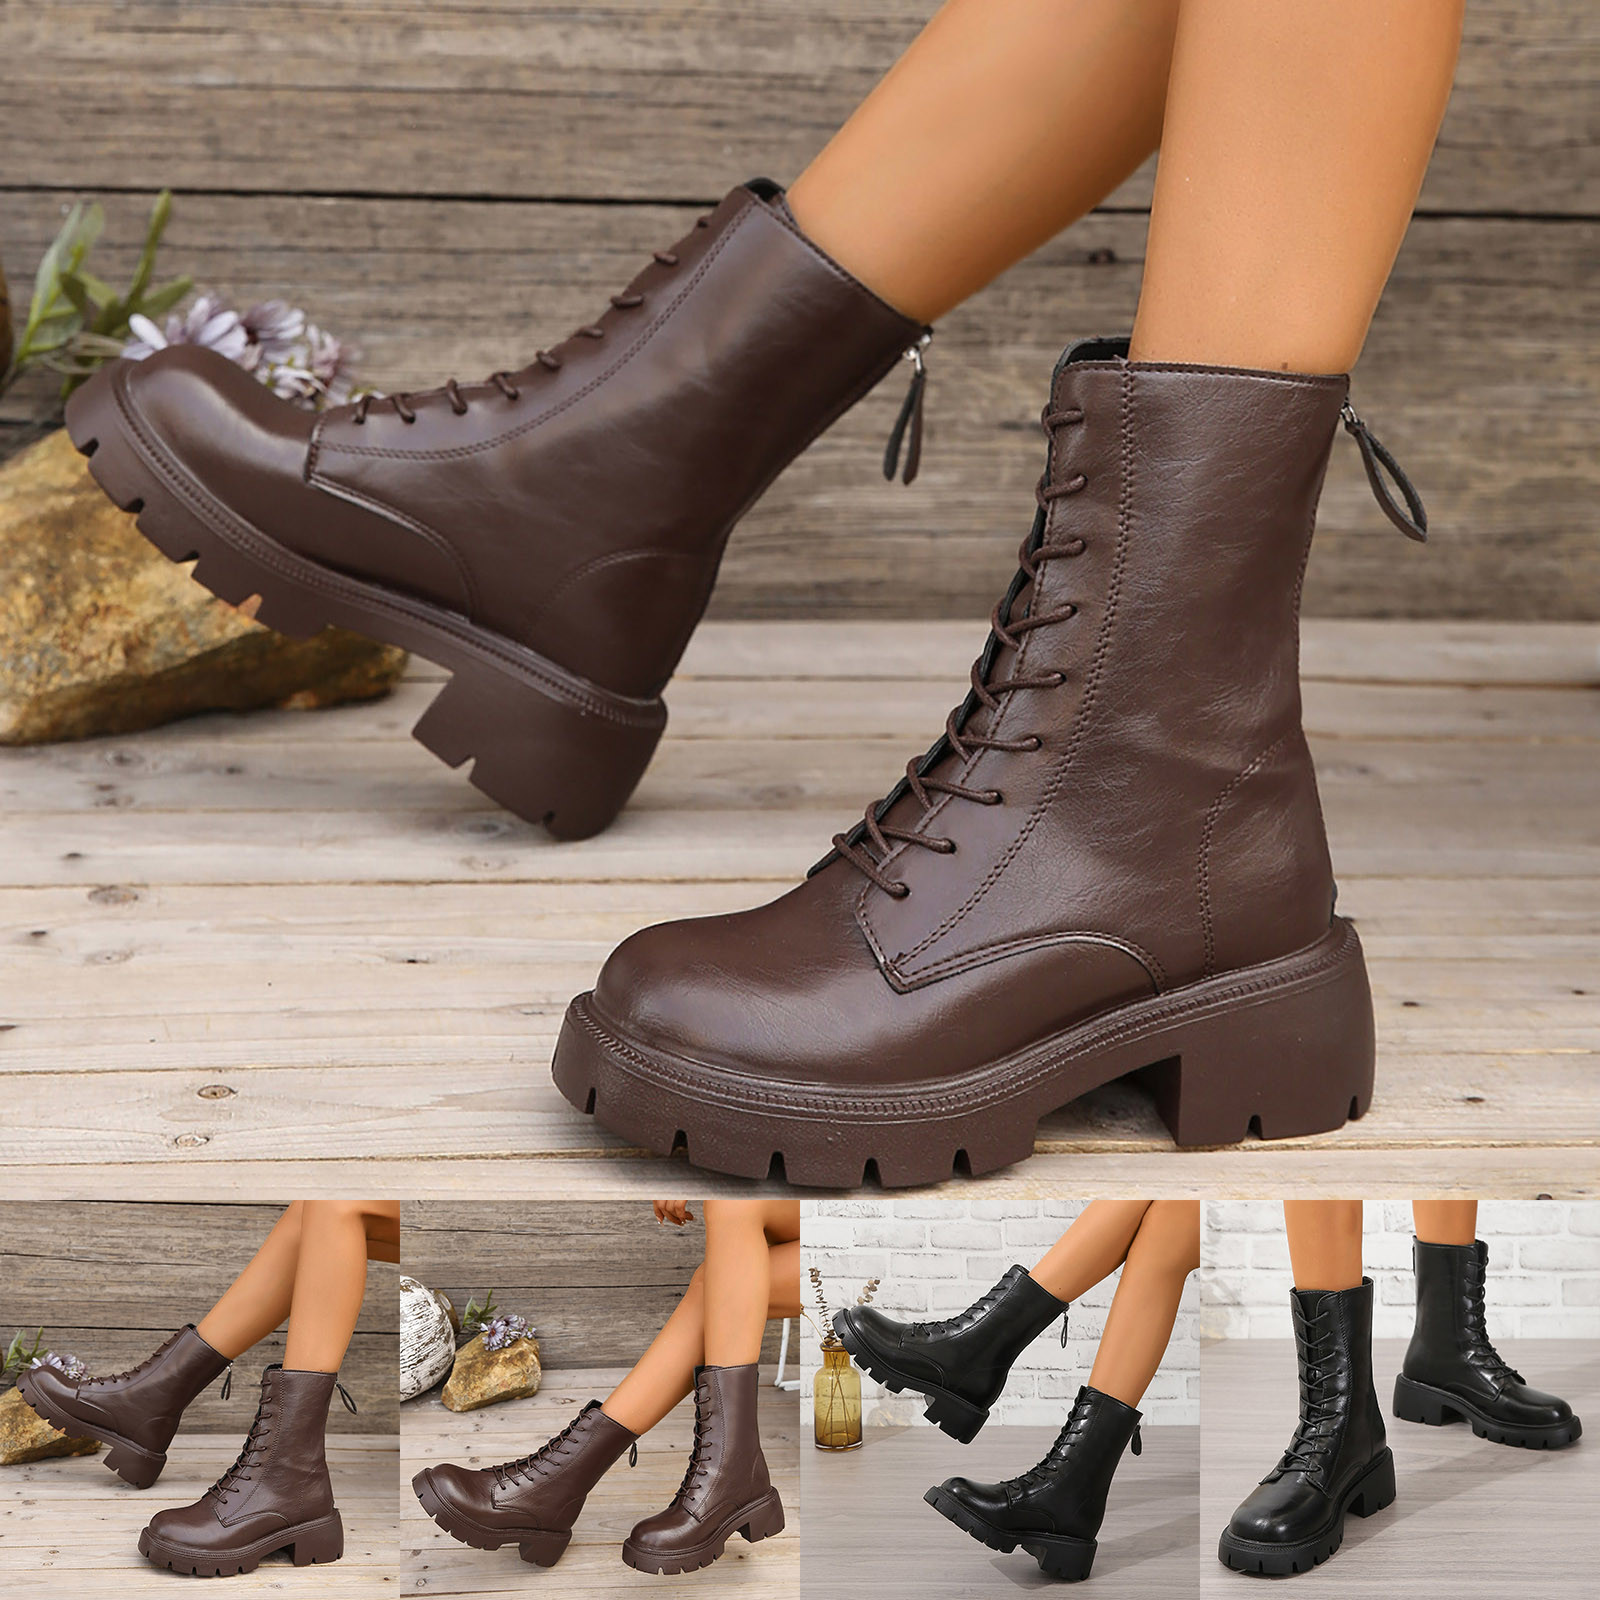 Wide Calf Knee High Boots for Women with Heel Wide Calf Rain Boots for